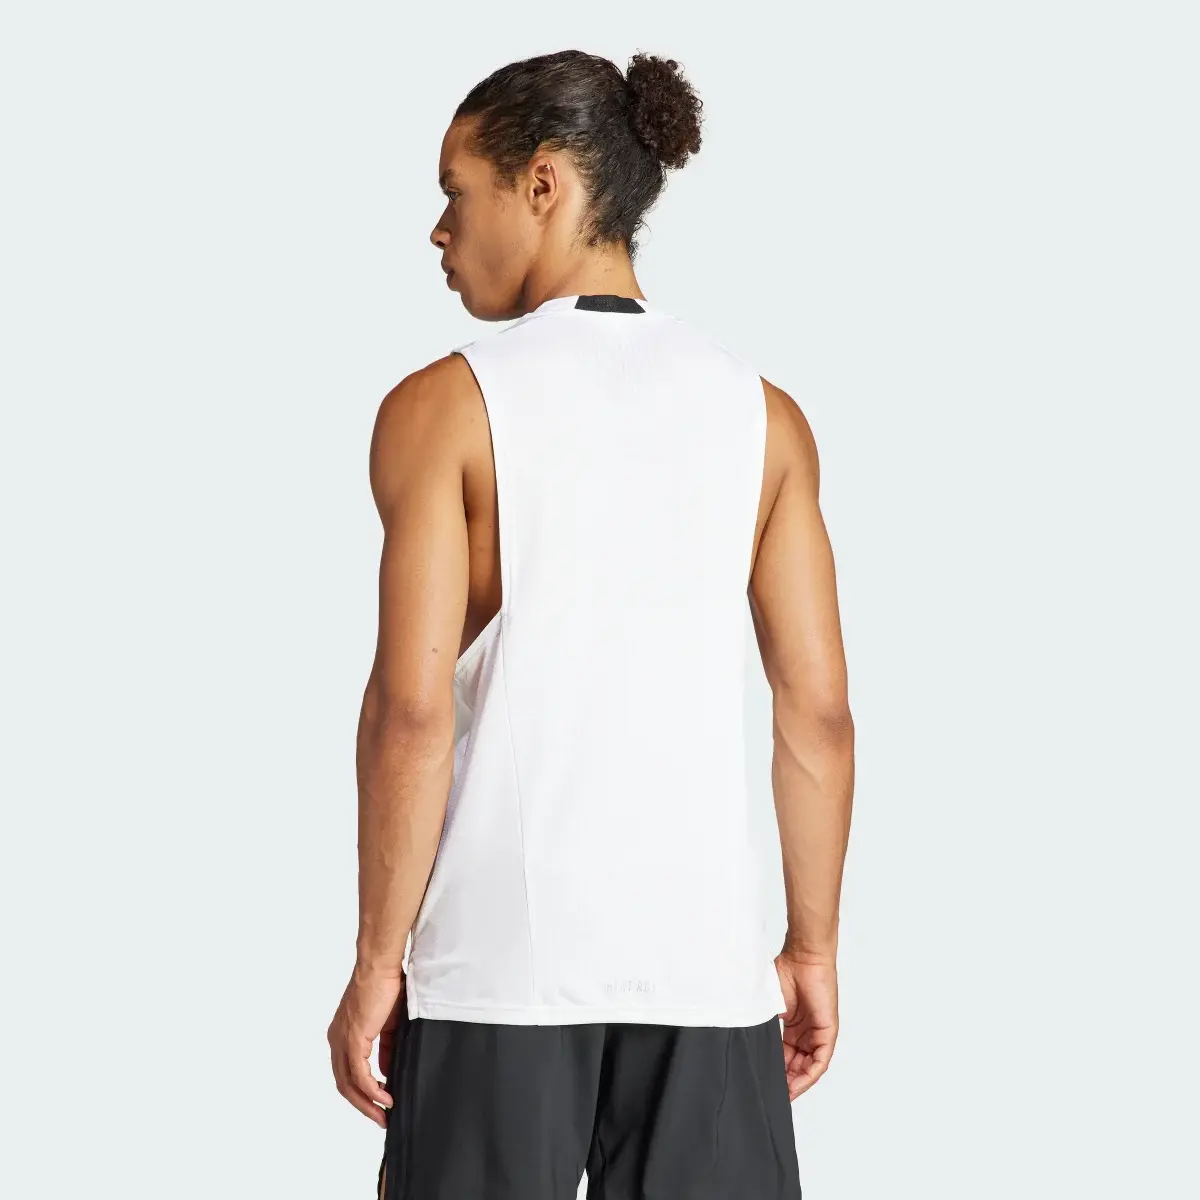 Adidas Designed for Training Workout HEAT.RDY Tank Top. 3